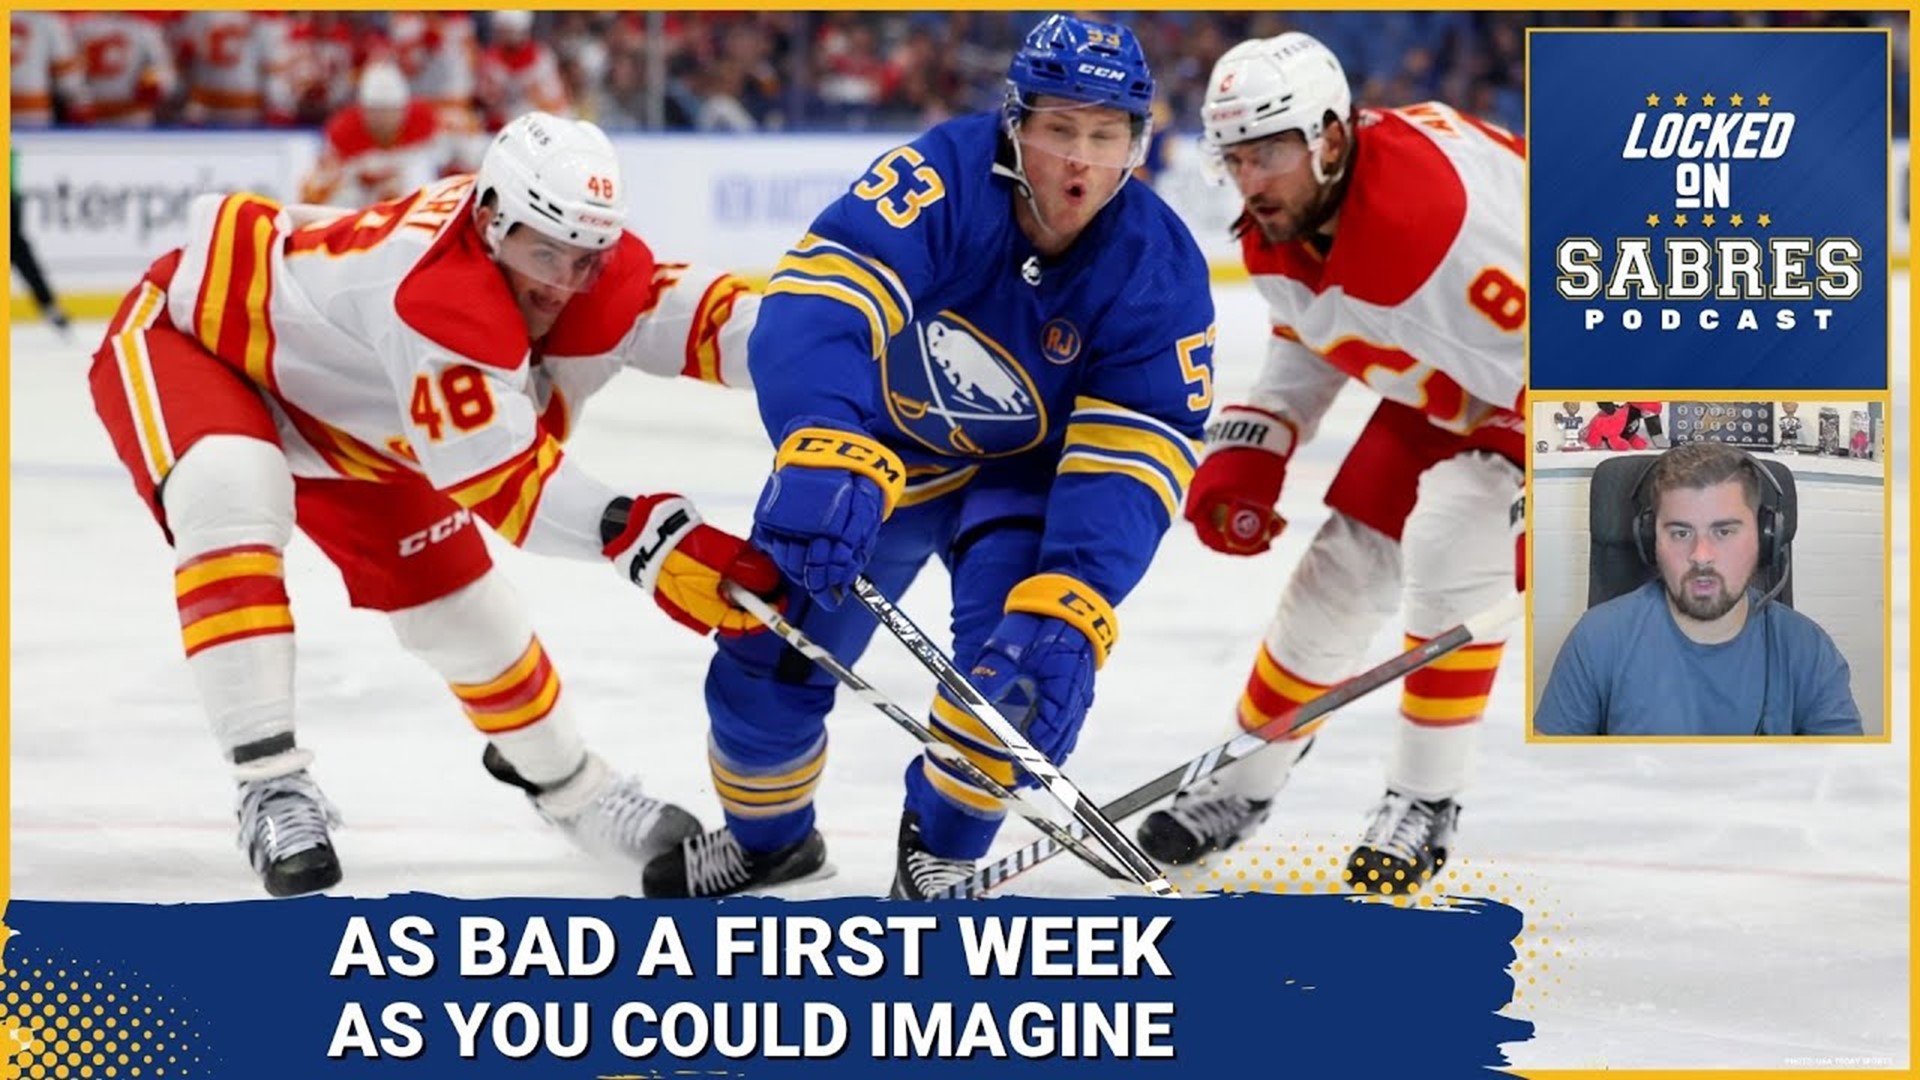 As bad a first week as you can imagine for the Sabres